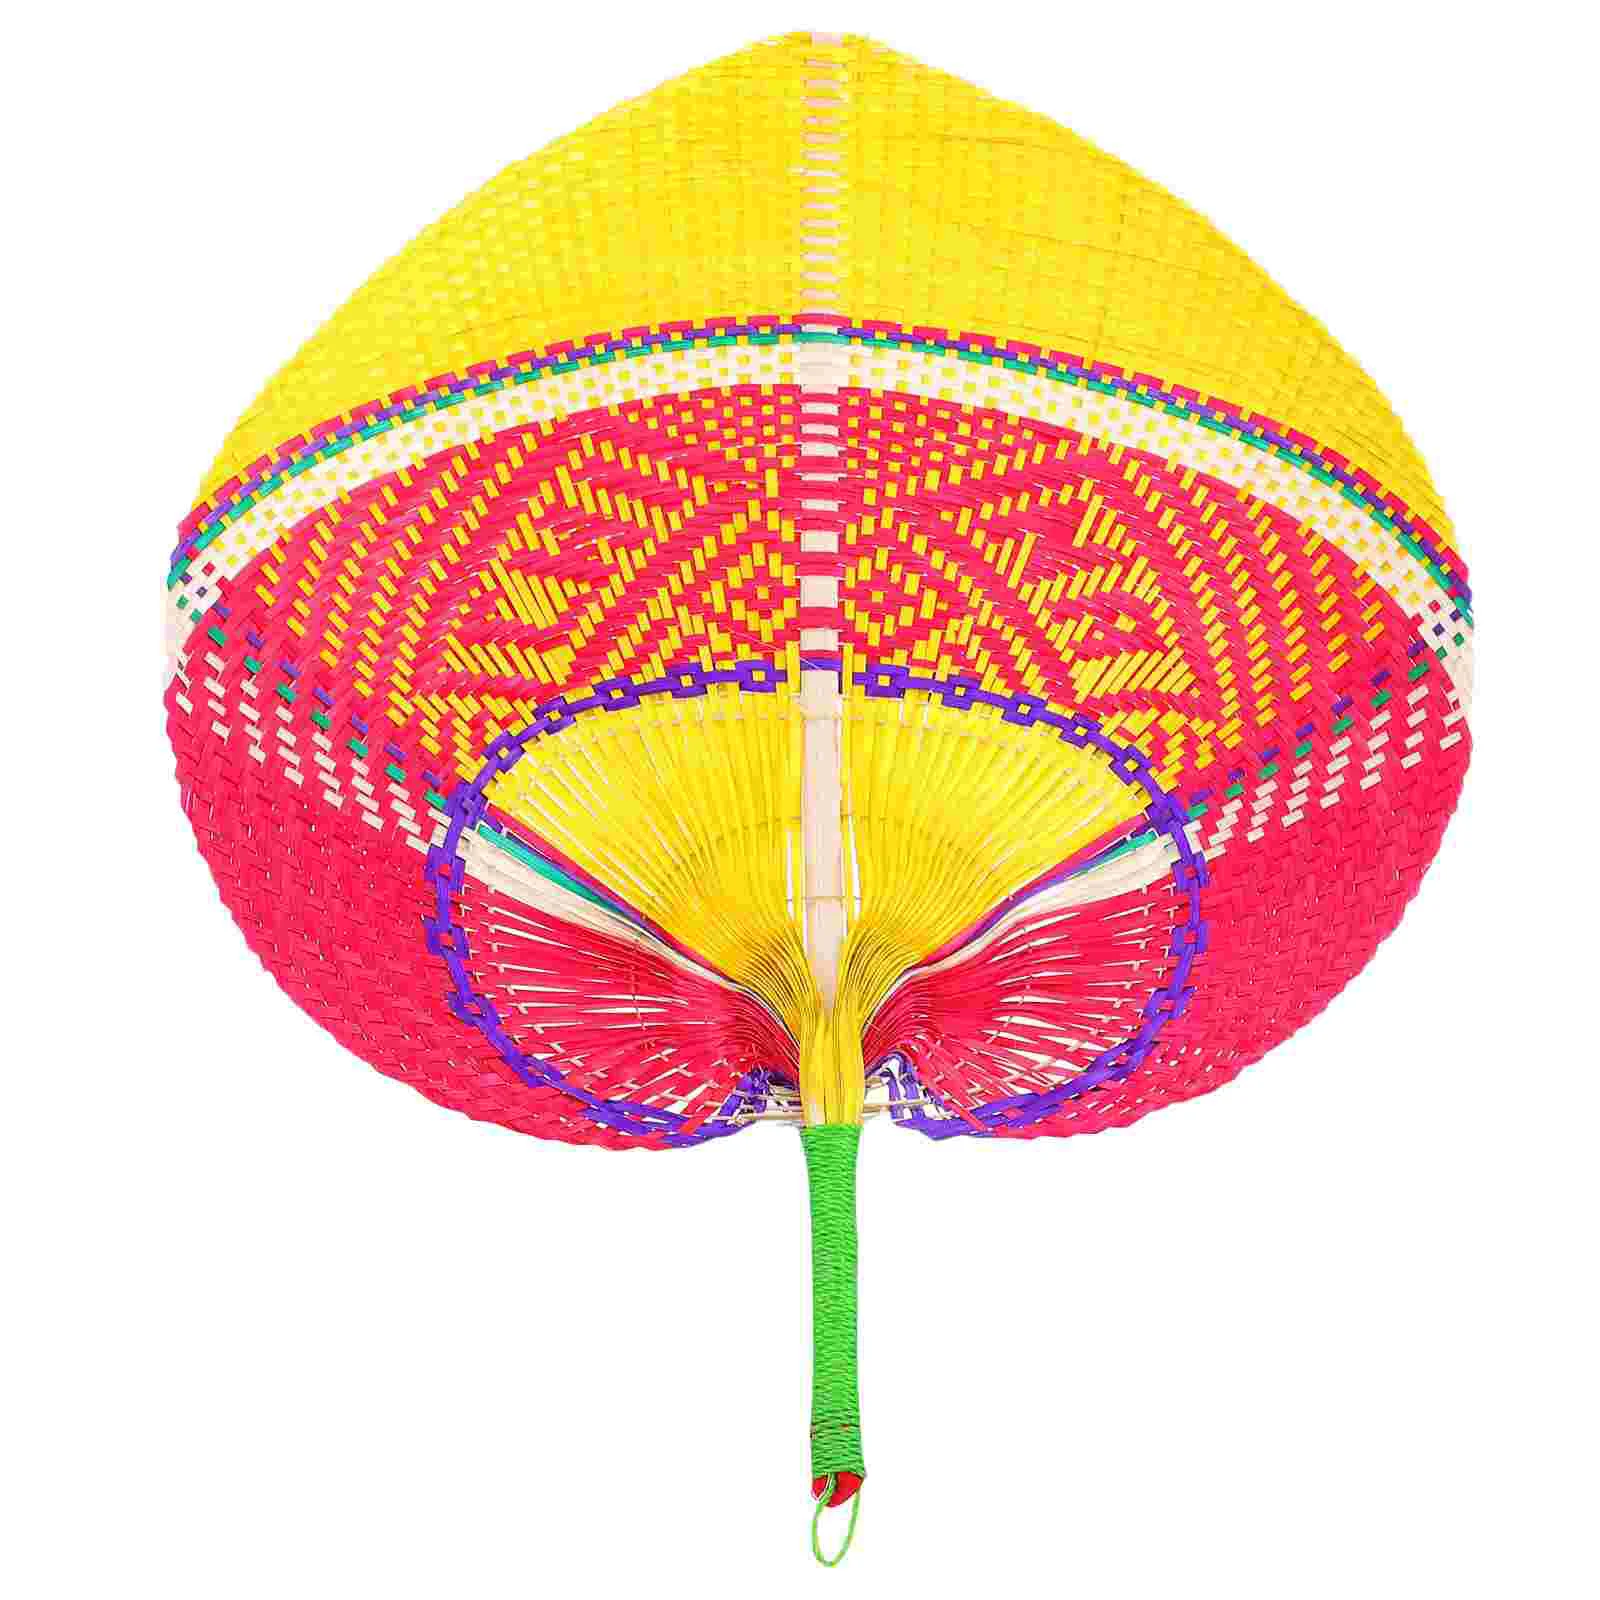 

Fan Hand Weaving Bamboo Decoration Palm Rattan Made Chinese Handmade Photo Prop Woven Fans Handle Handheld Straw Colorful Held